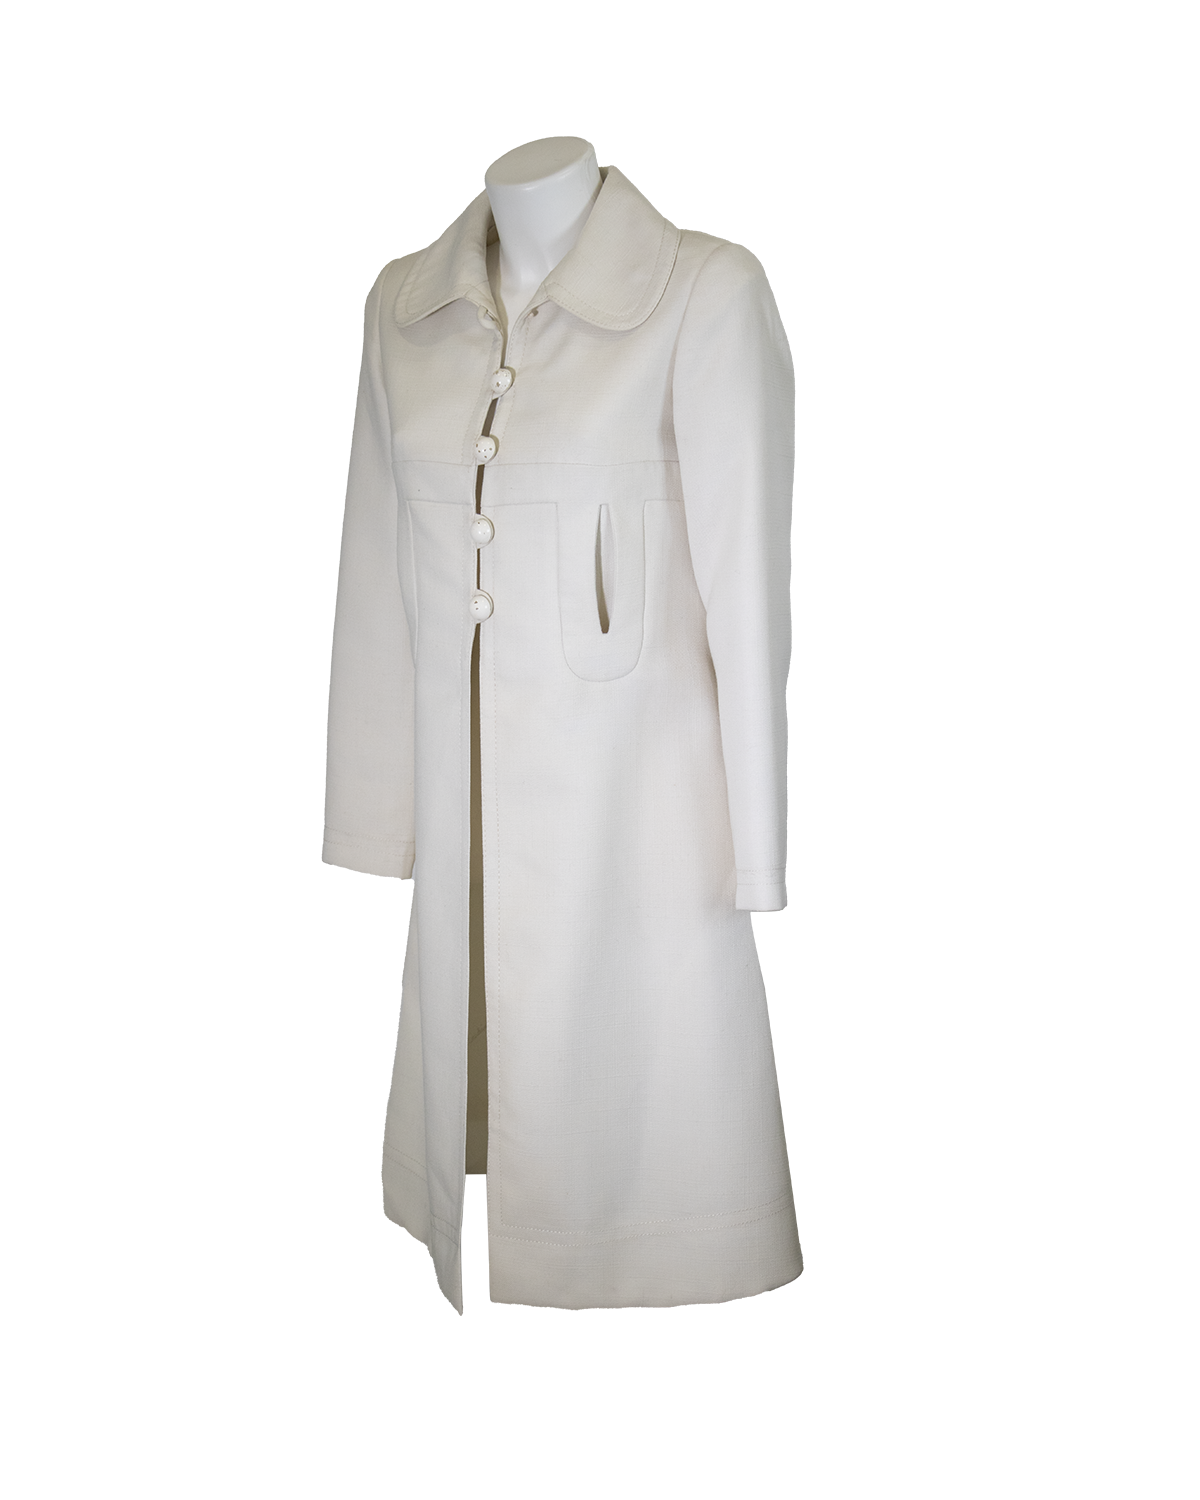 Pierre Cardin White Cotton Coat from 1970s